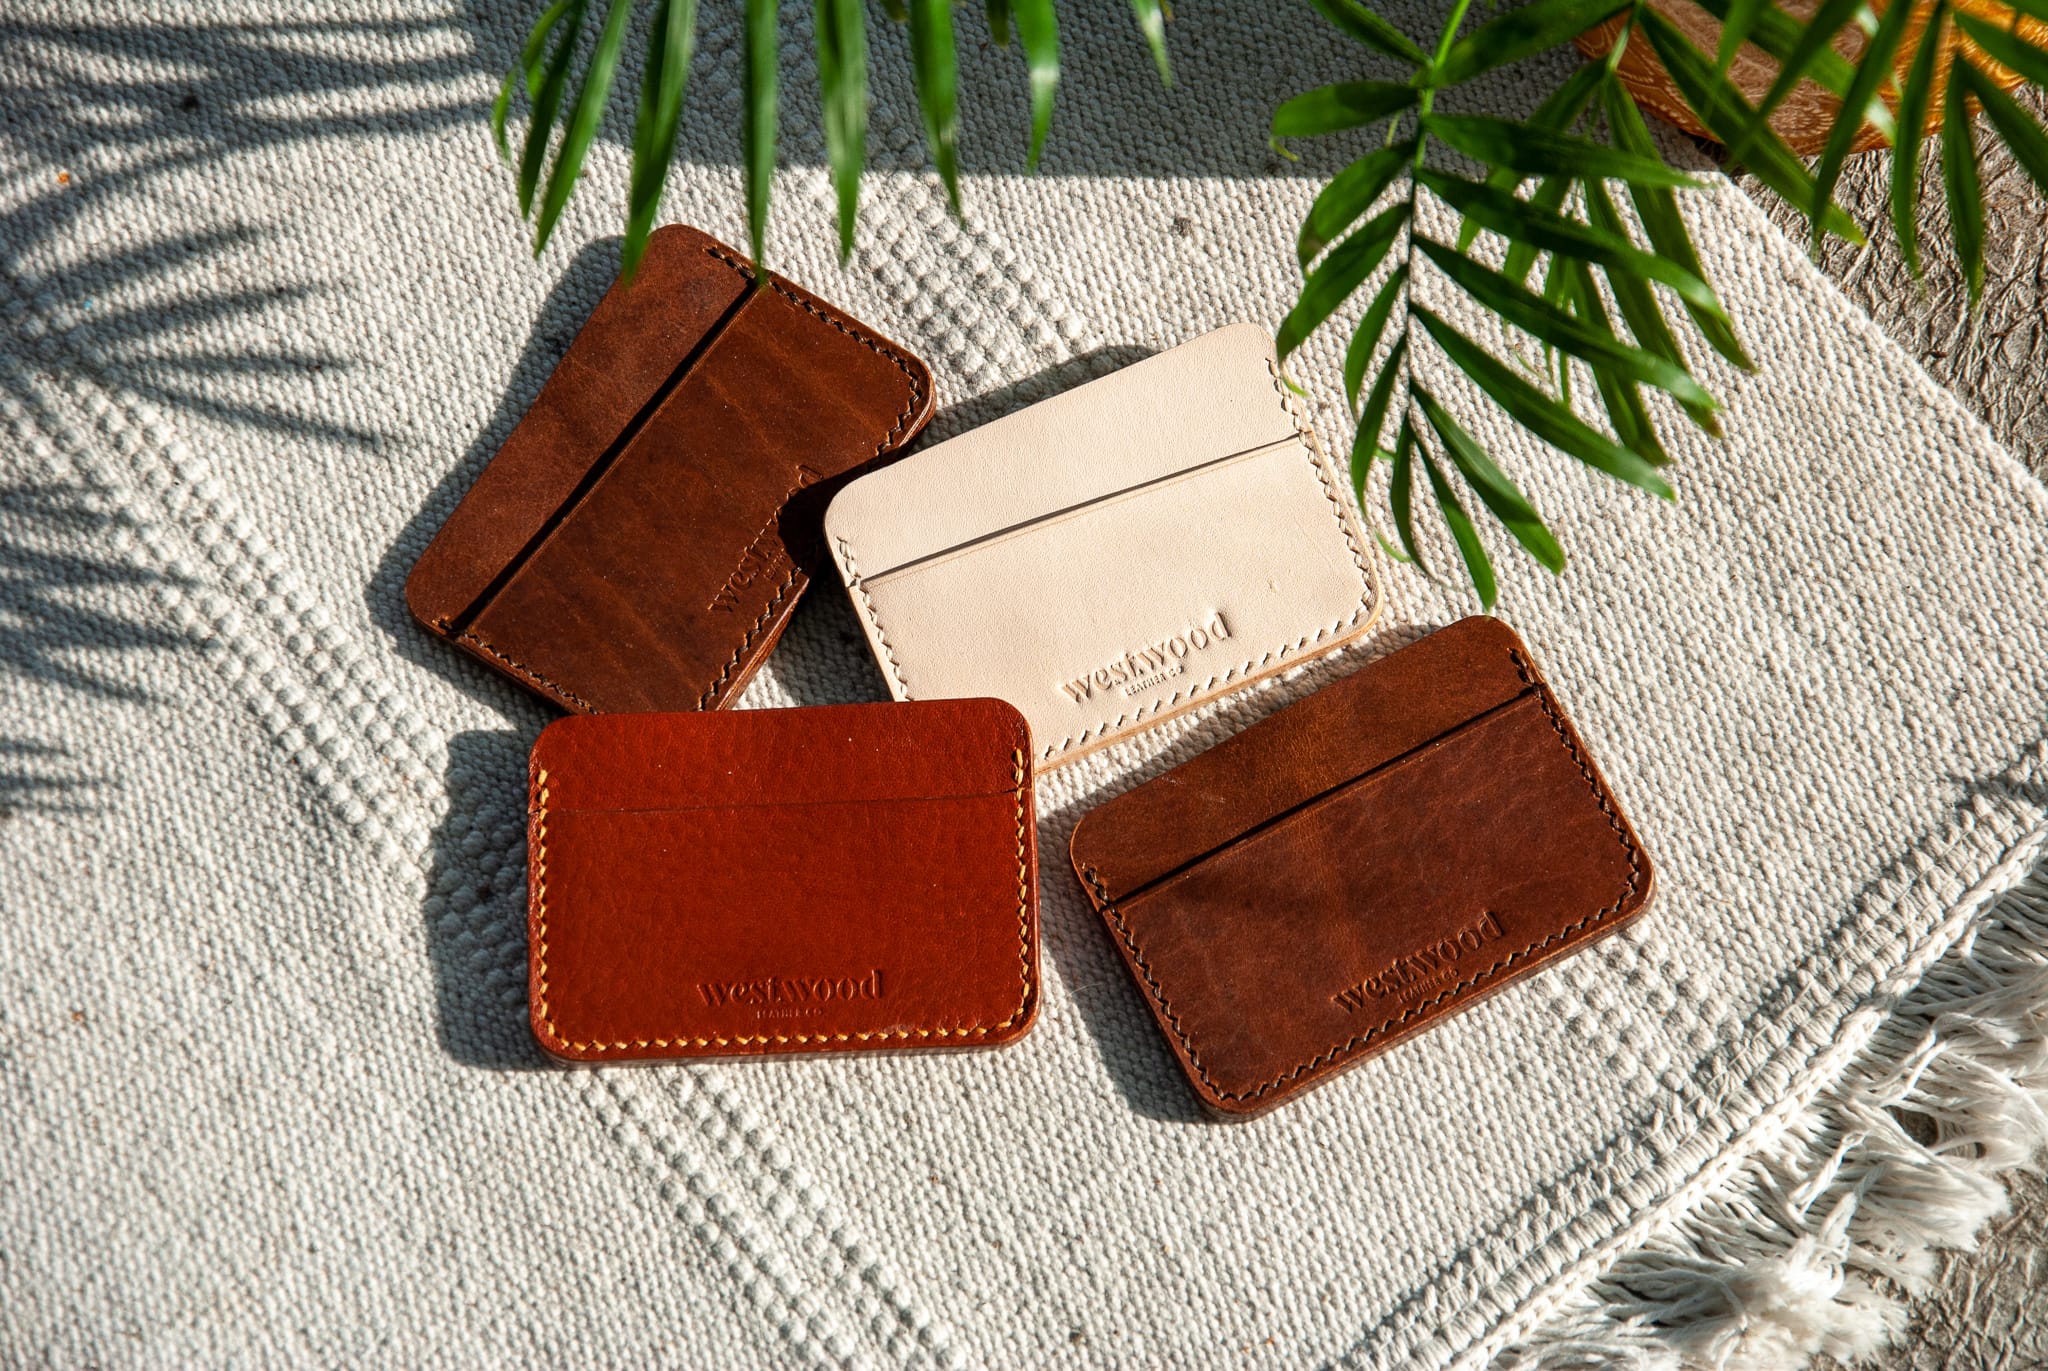 four leather cardholders on a white woven rug with the shadow of a palm leaf overhead